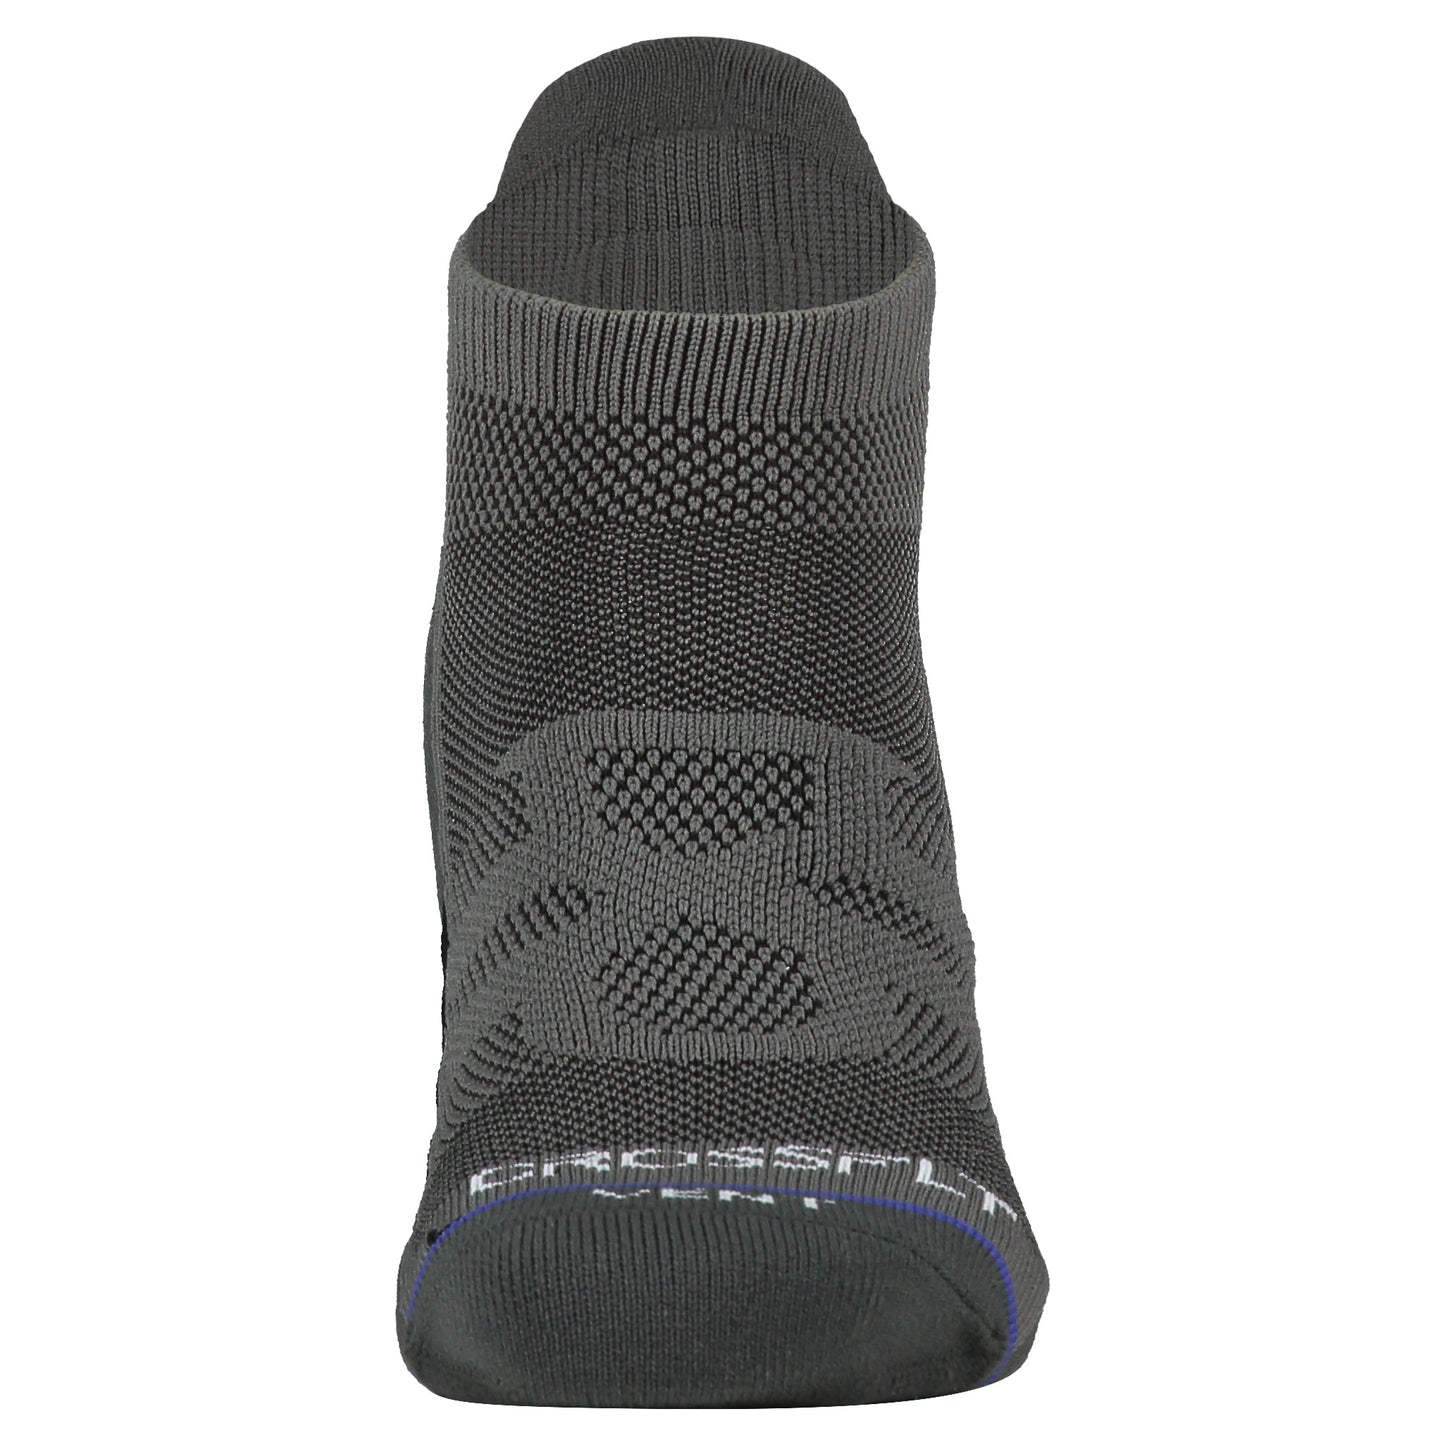 Crossfly men's Vent Low Socks in grey / black from the Performance series, featuring AirVent and AirBeams.